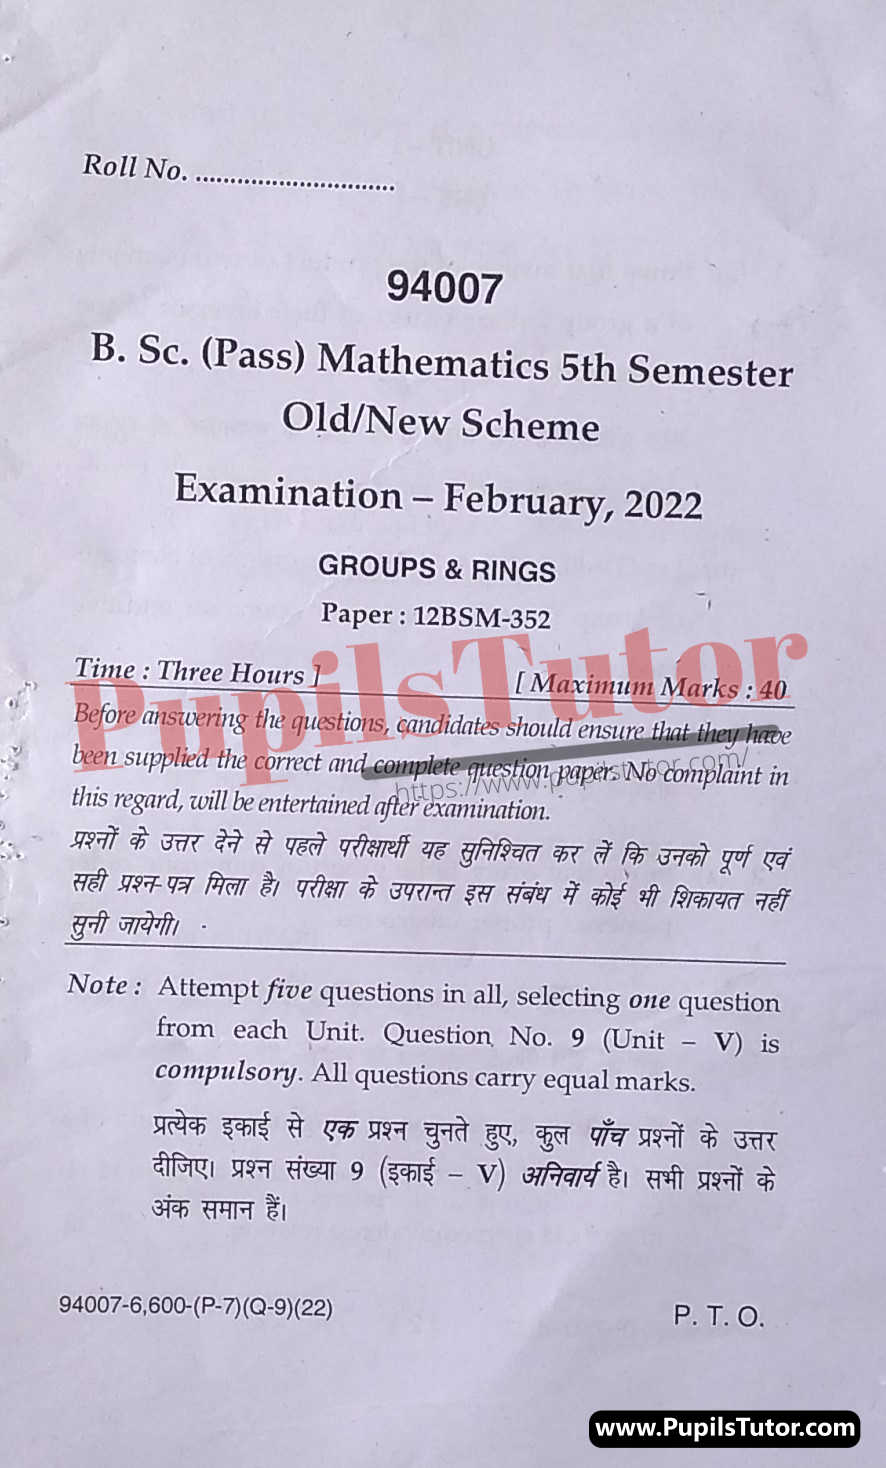 MDU (Maharshi Dayanand University, Rohtak Haryana) BSc Mathematics Pass Course 5th Semester Previous Year Groups And Rings Question Paper For February, 2022 Exam (Question Paper Page 1) - pupilstutor.com